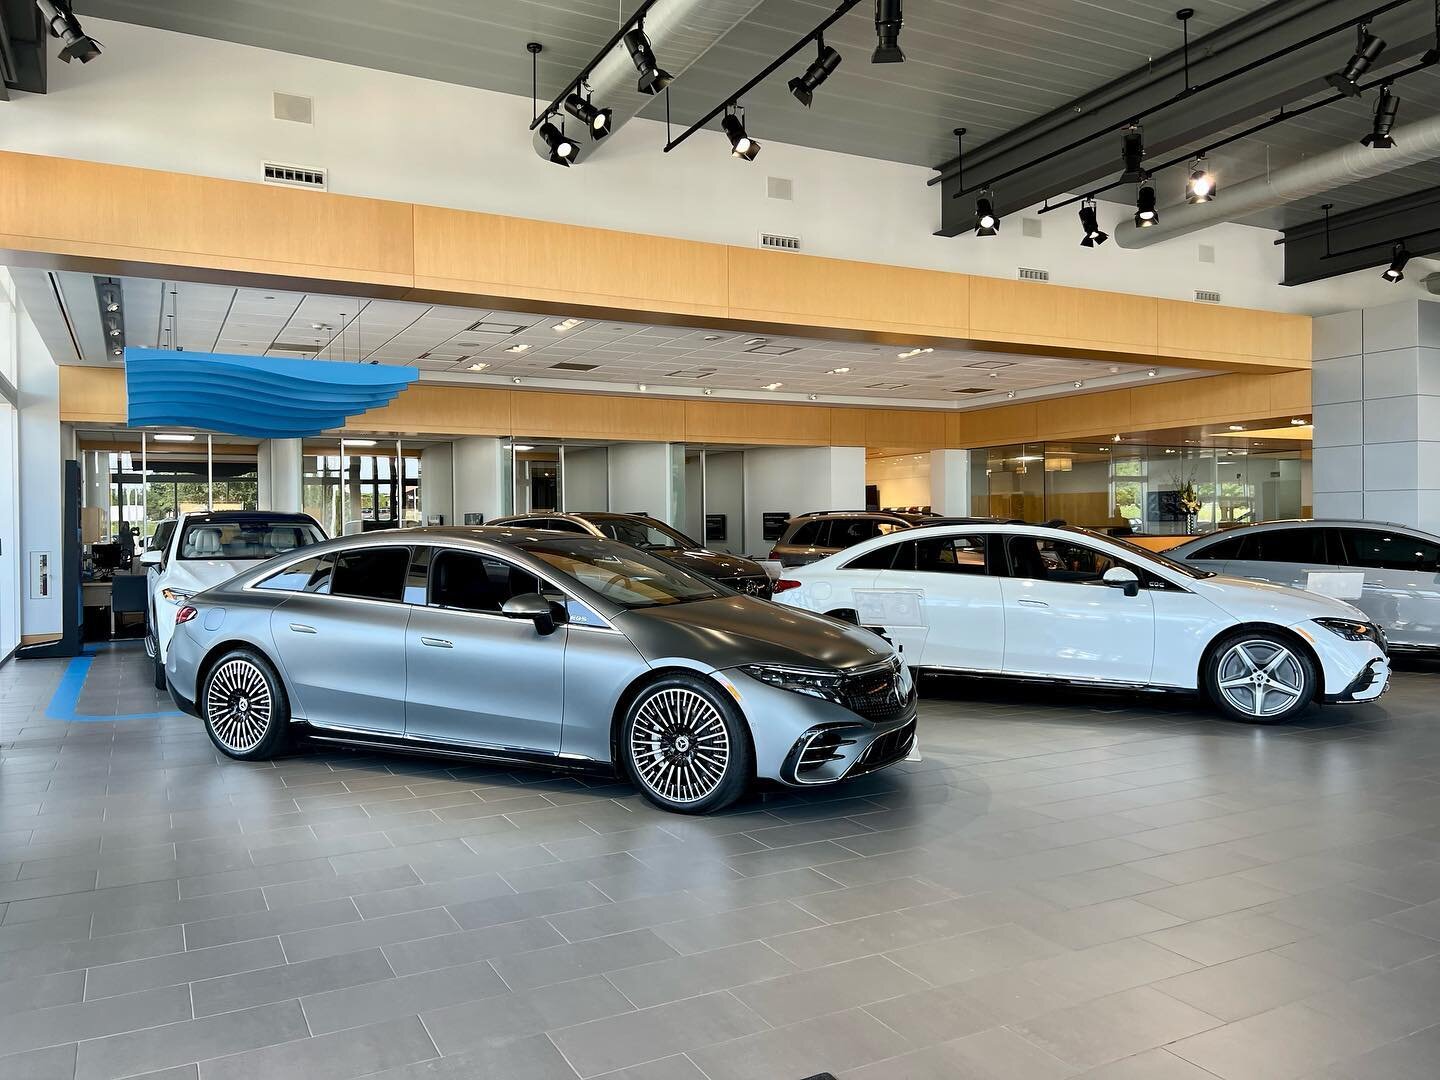 A peek inside the incredible @parkplacemotorcarsarlington showroom!  This is the @mercedesbenz all-electric EQ lineup. What absolutely incredible vehicles! ❤️ @parkplacetexas #texas #dallas #earthday #mercedes #eqs